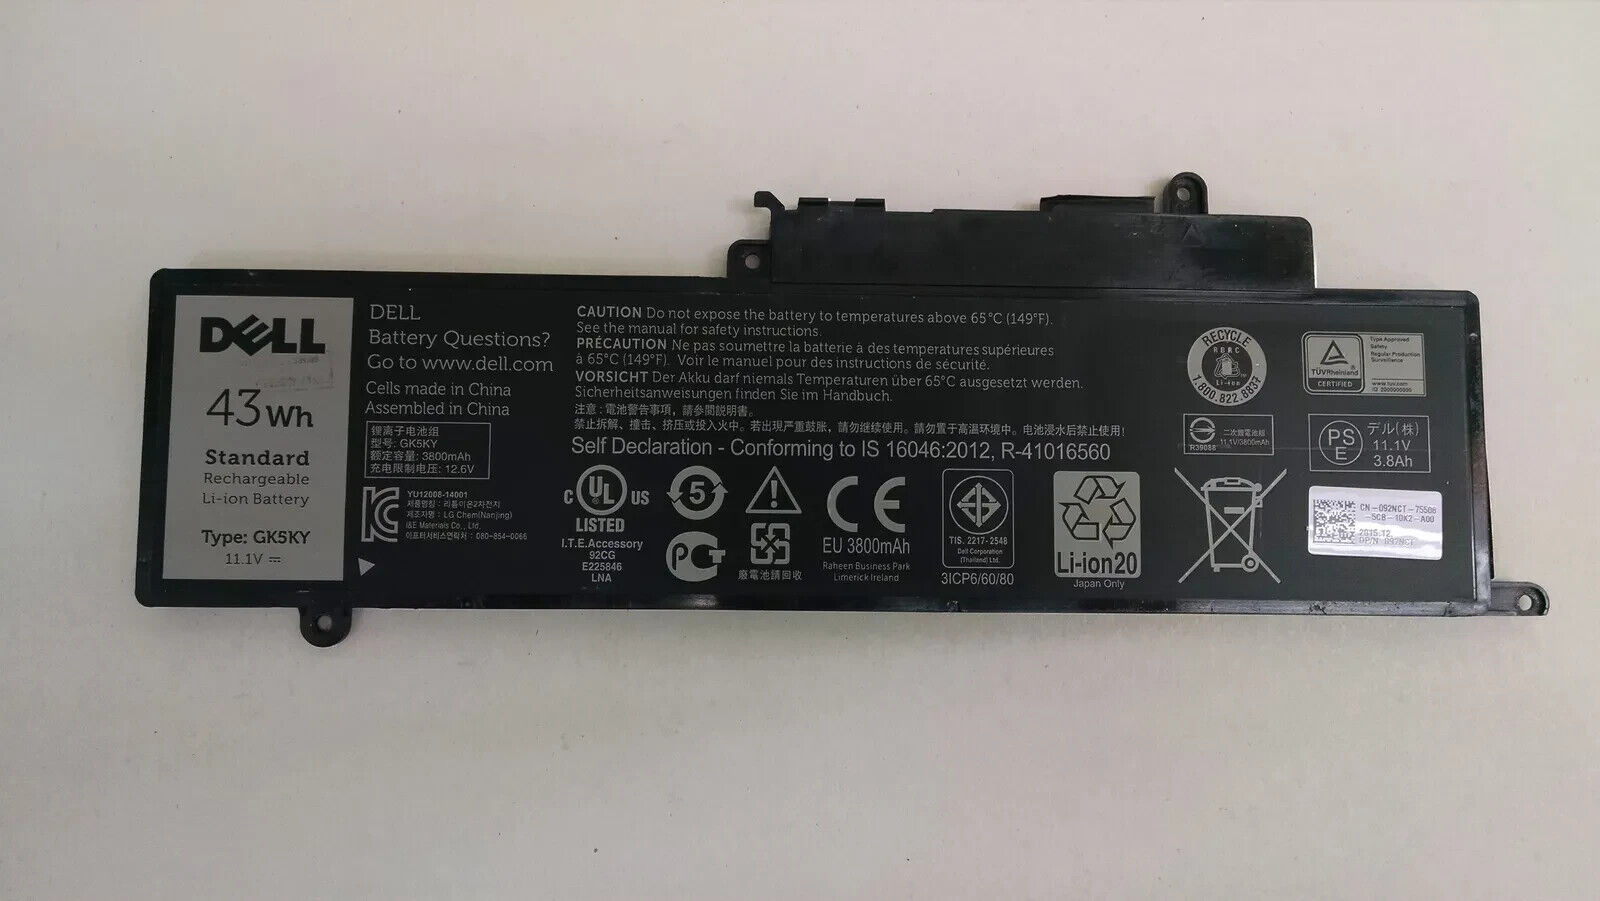 Dell GK5KY 6 Cell 43Wh Laptop Battery for Inspiron 3000 Series